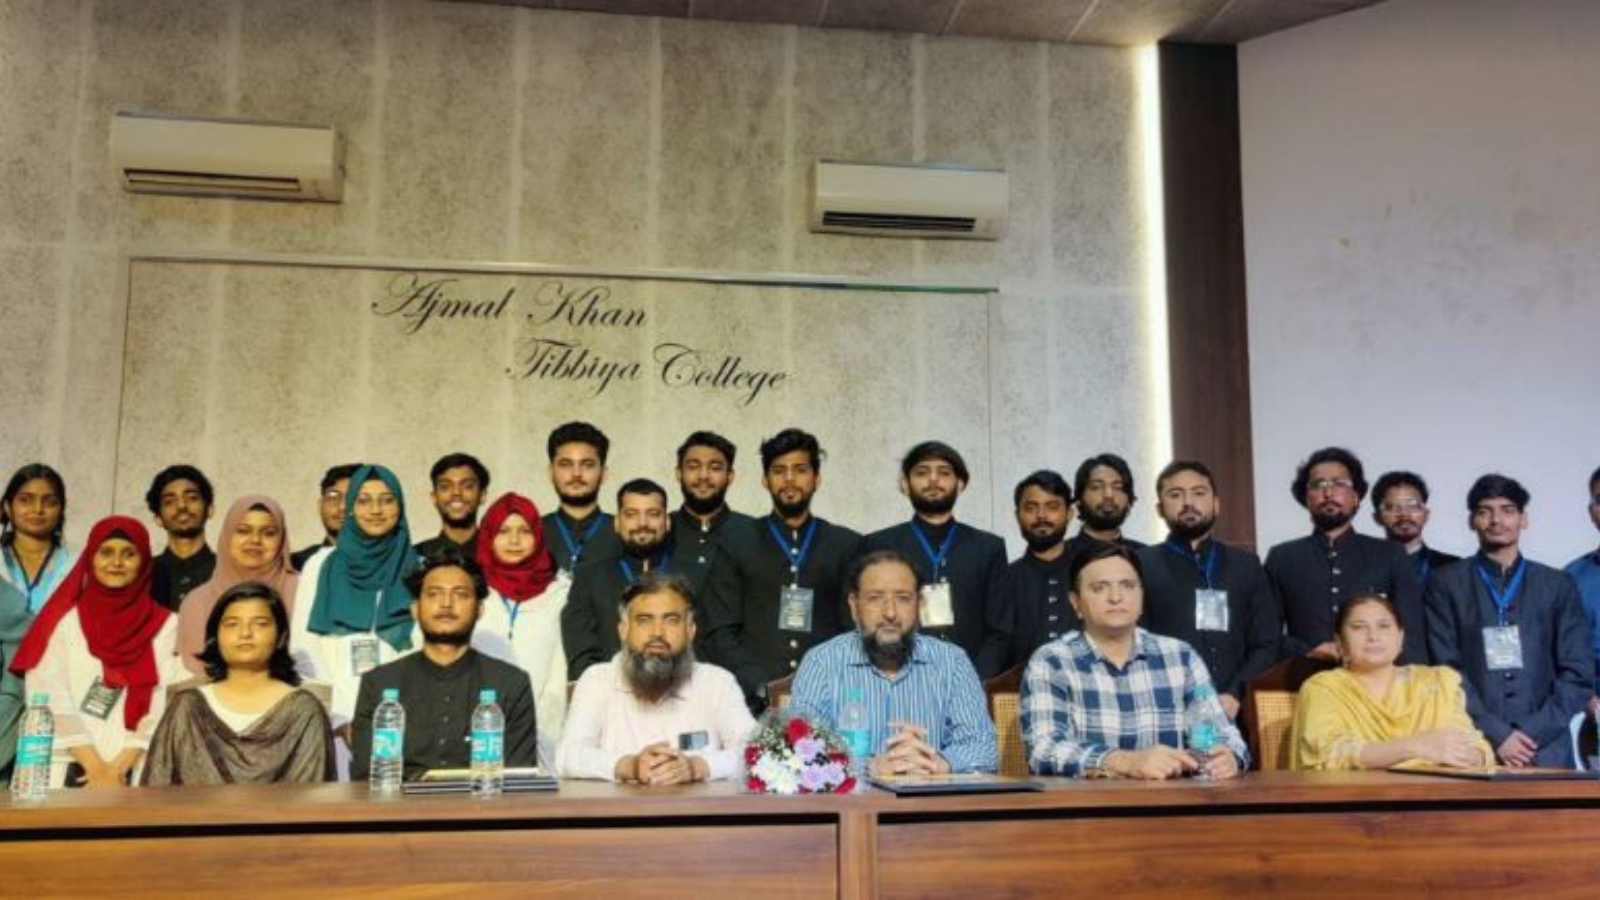 Excel Mastery: Basic to Advanced Workshop Empowers AMU Students